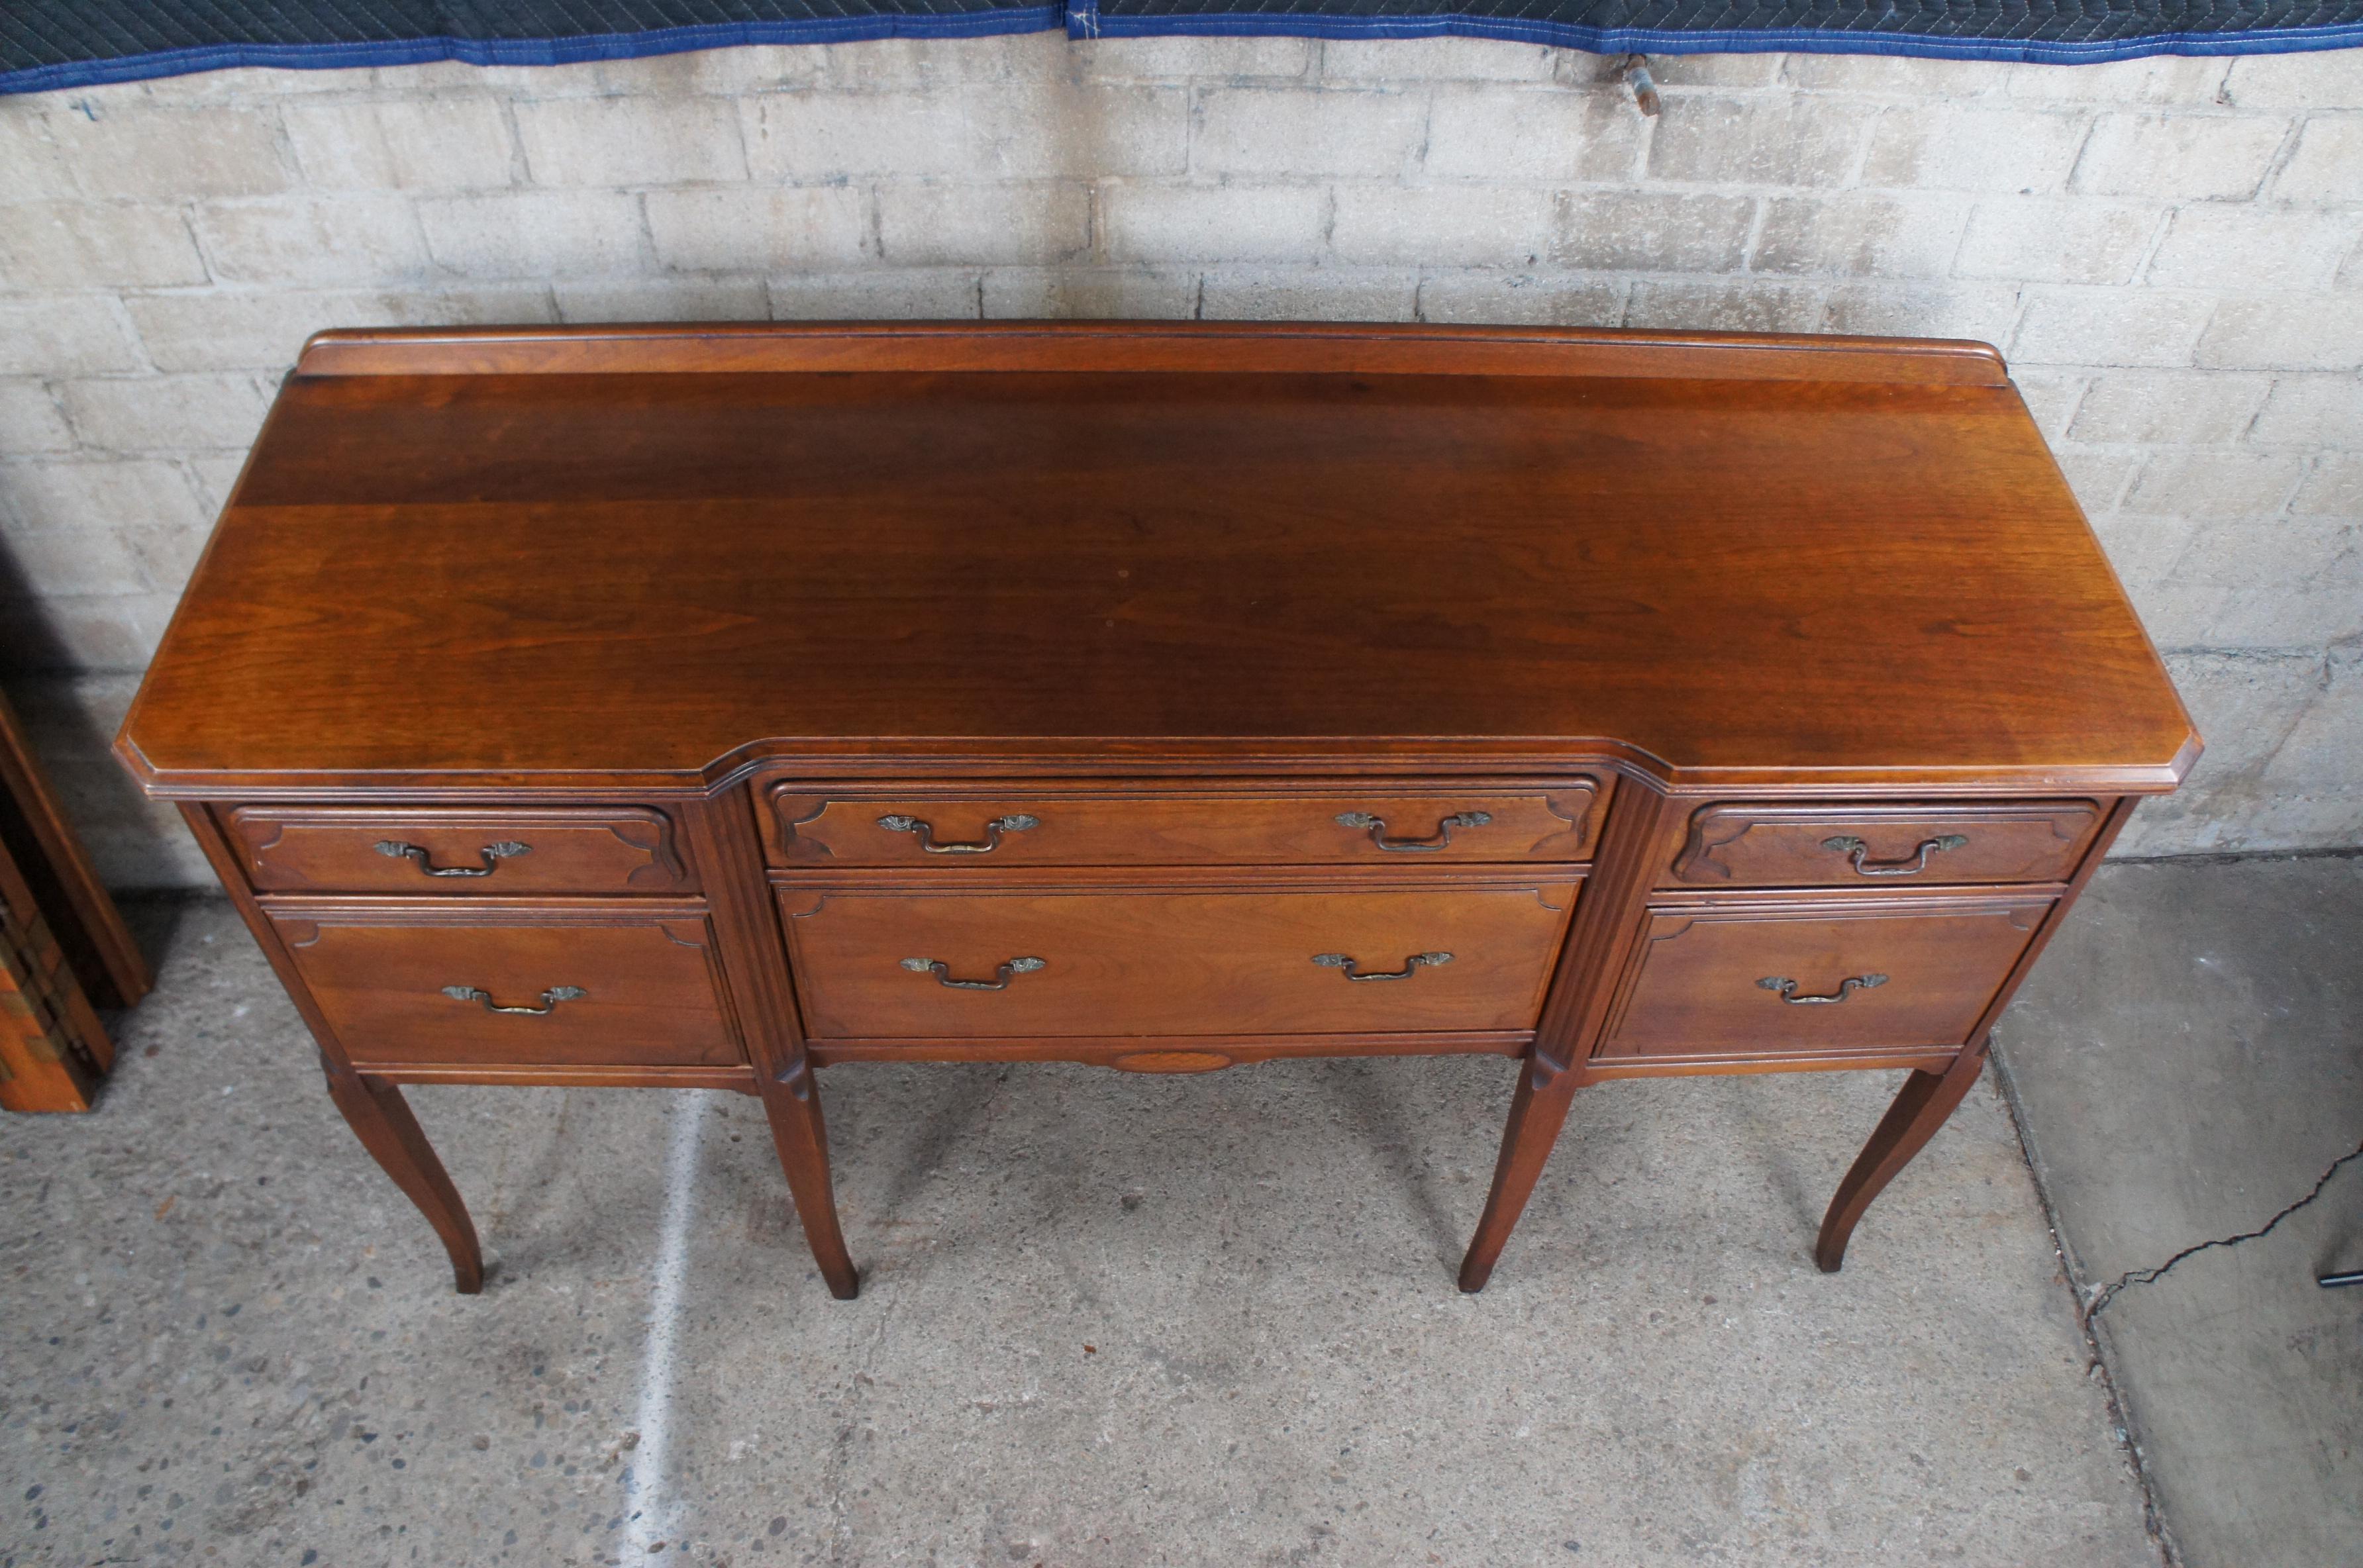 French Provincial Antique American Walnut Buffet Sideboard Server Console Credenza French Revival